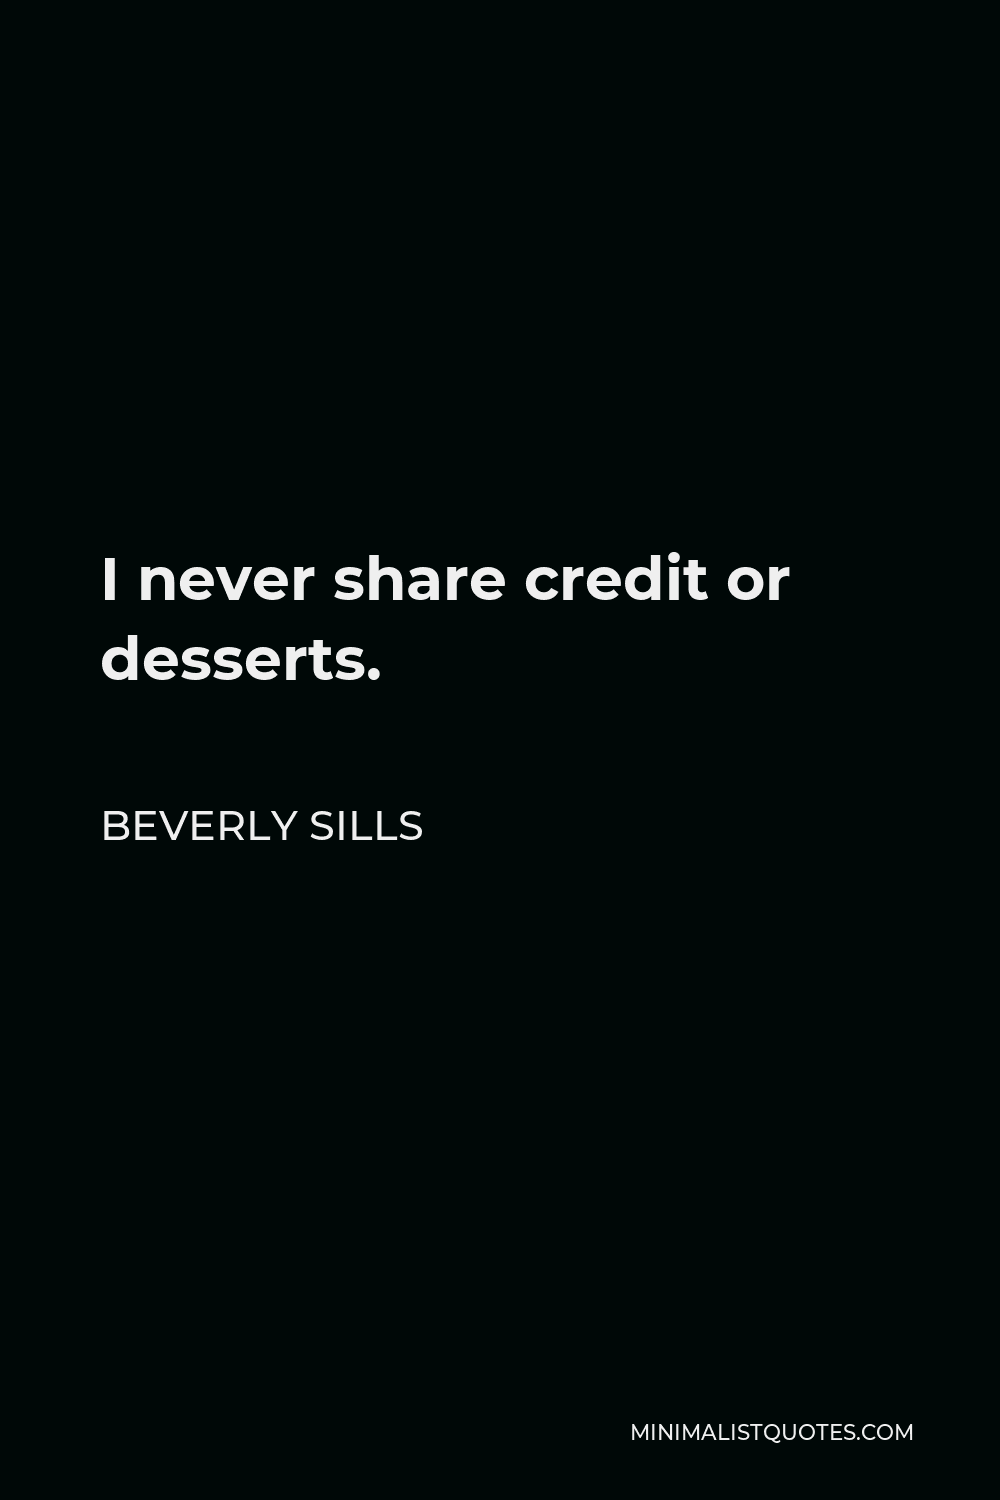 Beverly Sills Quote - I never share credit or desserts.